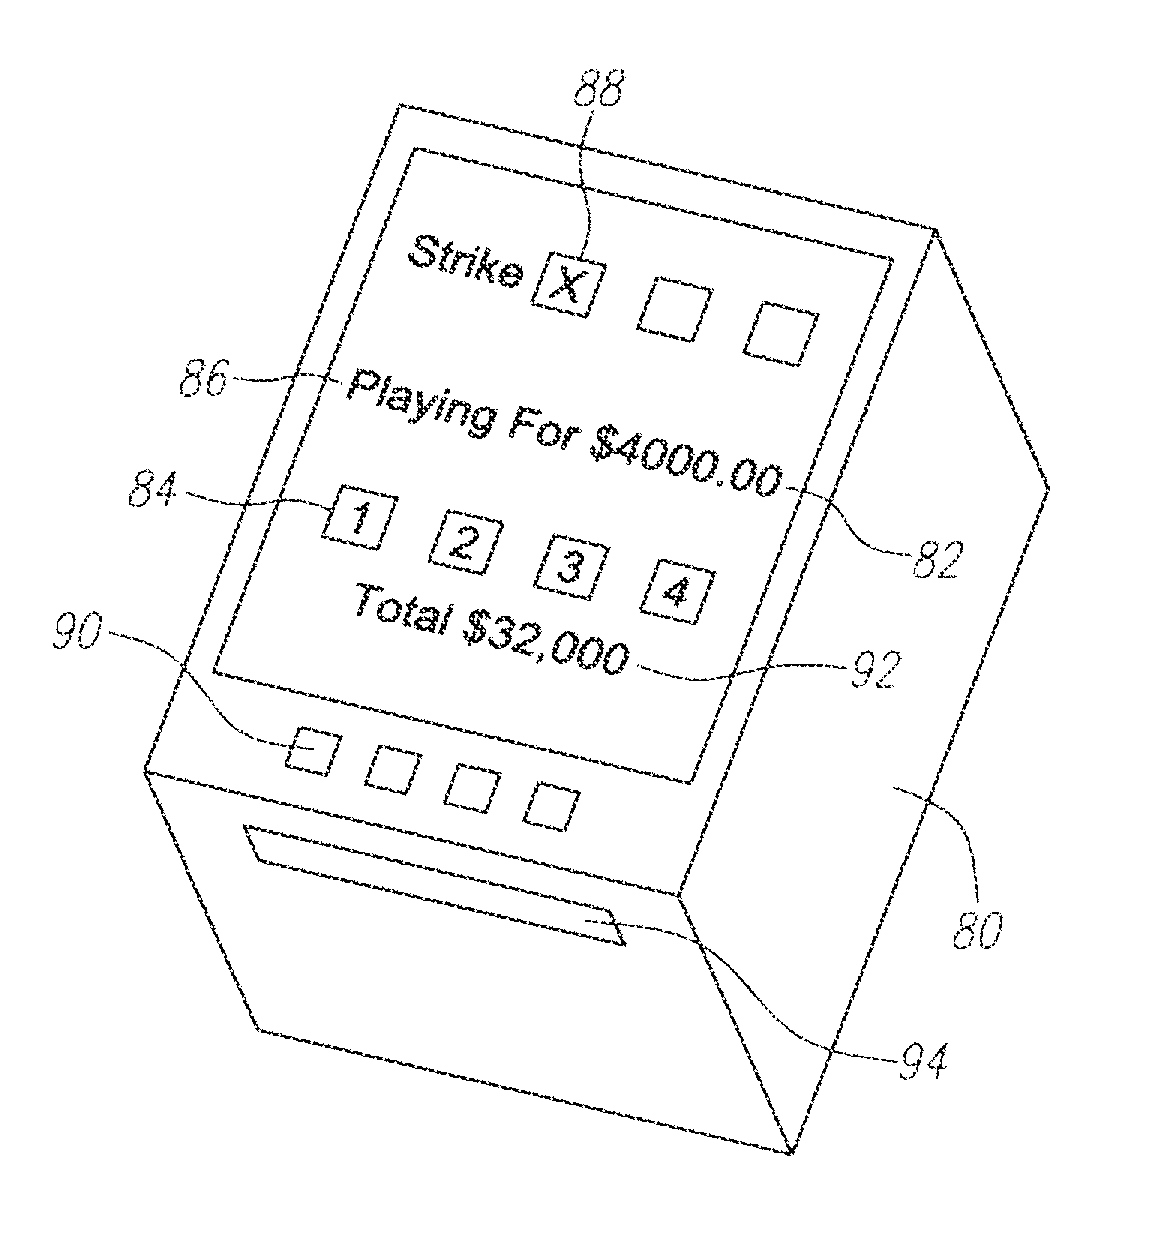 Apparatus, systems and methods for implementing enhanced gaming and prizing parameters in an electronic environment